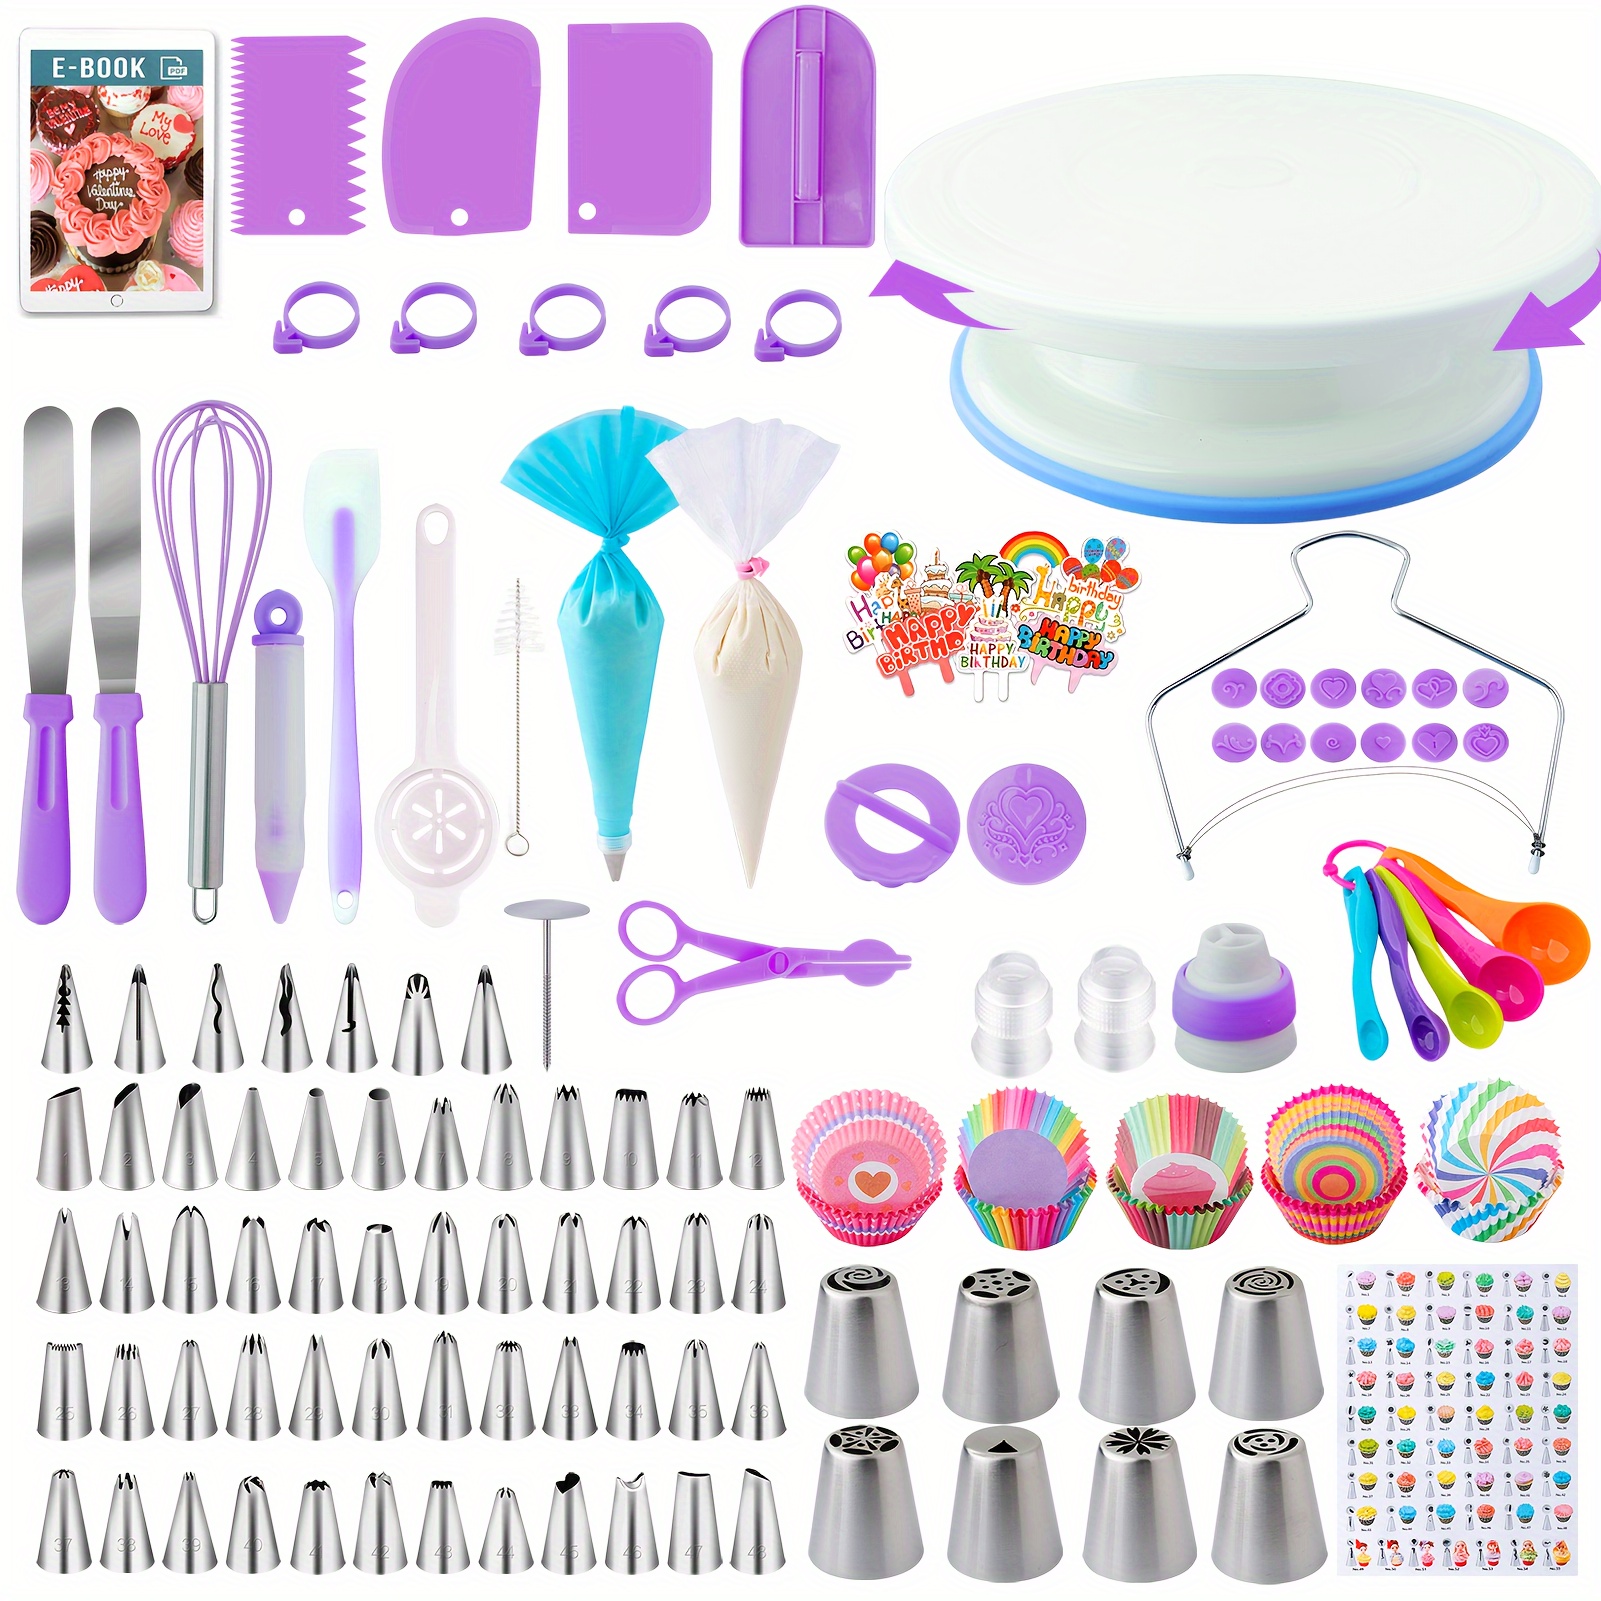 

Cake Decorating Supplies Kit Tools 356pcs, Baking Accessories With Cake Turntable, Pastry Piping Bag, Piping Icing Tips For Beginners